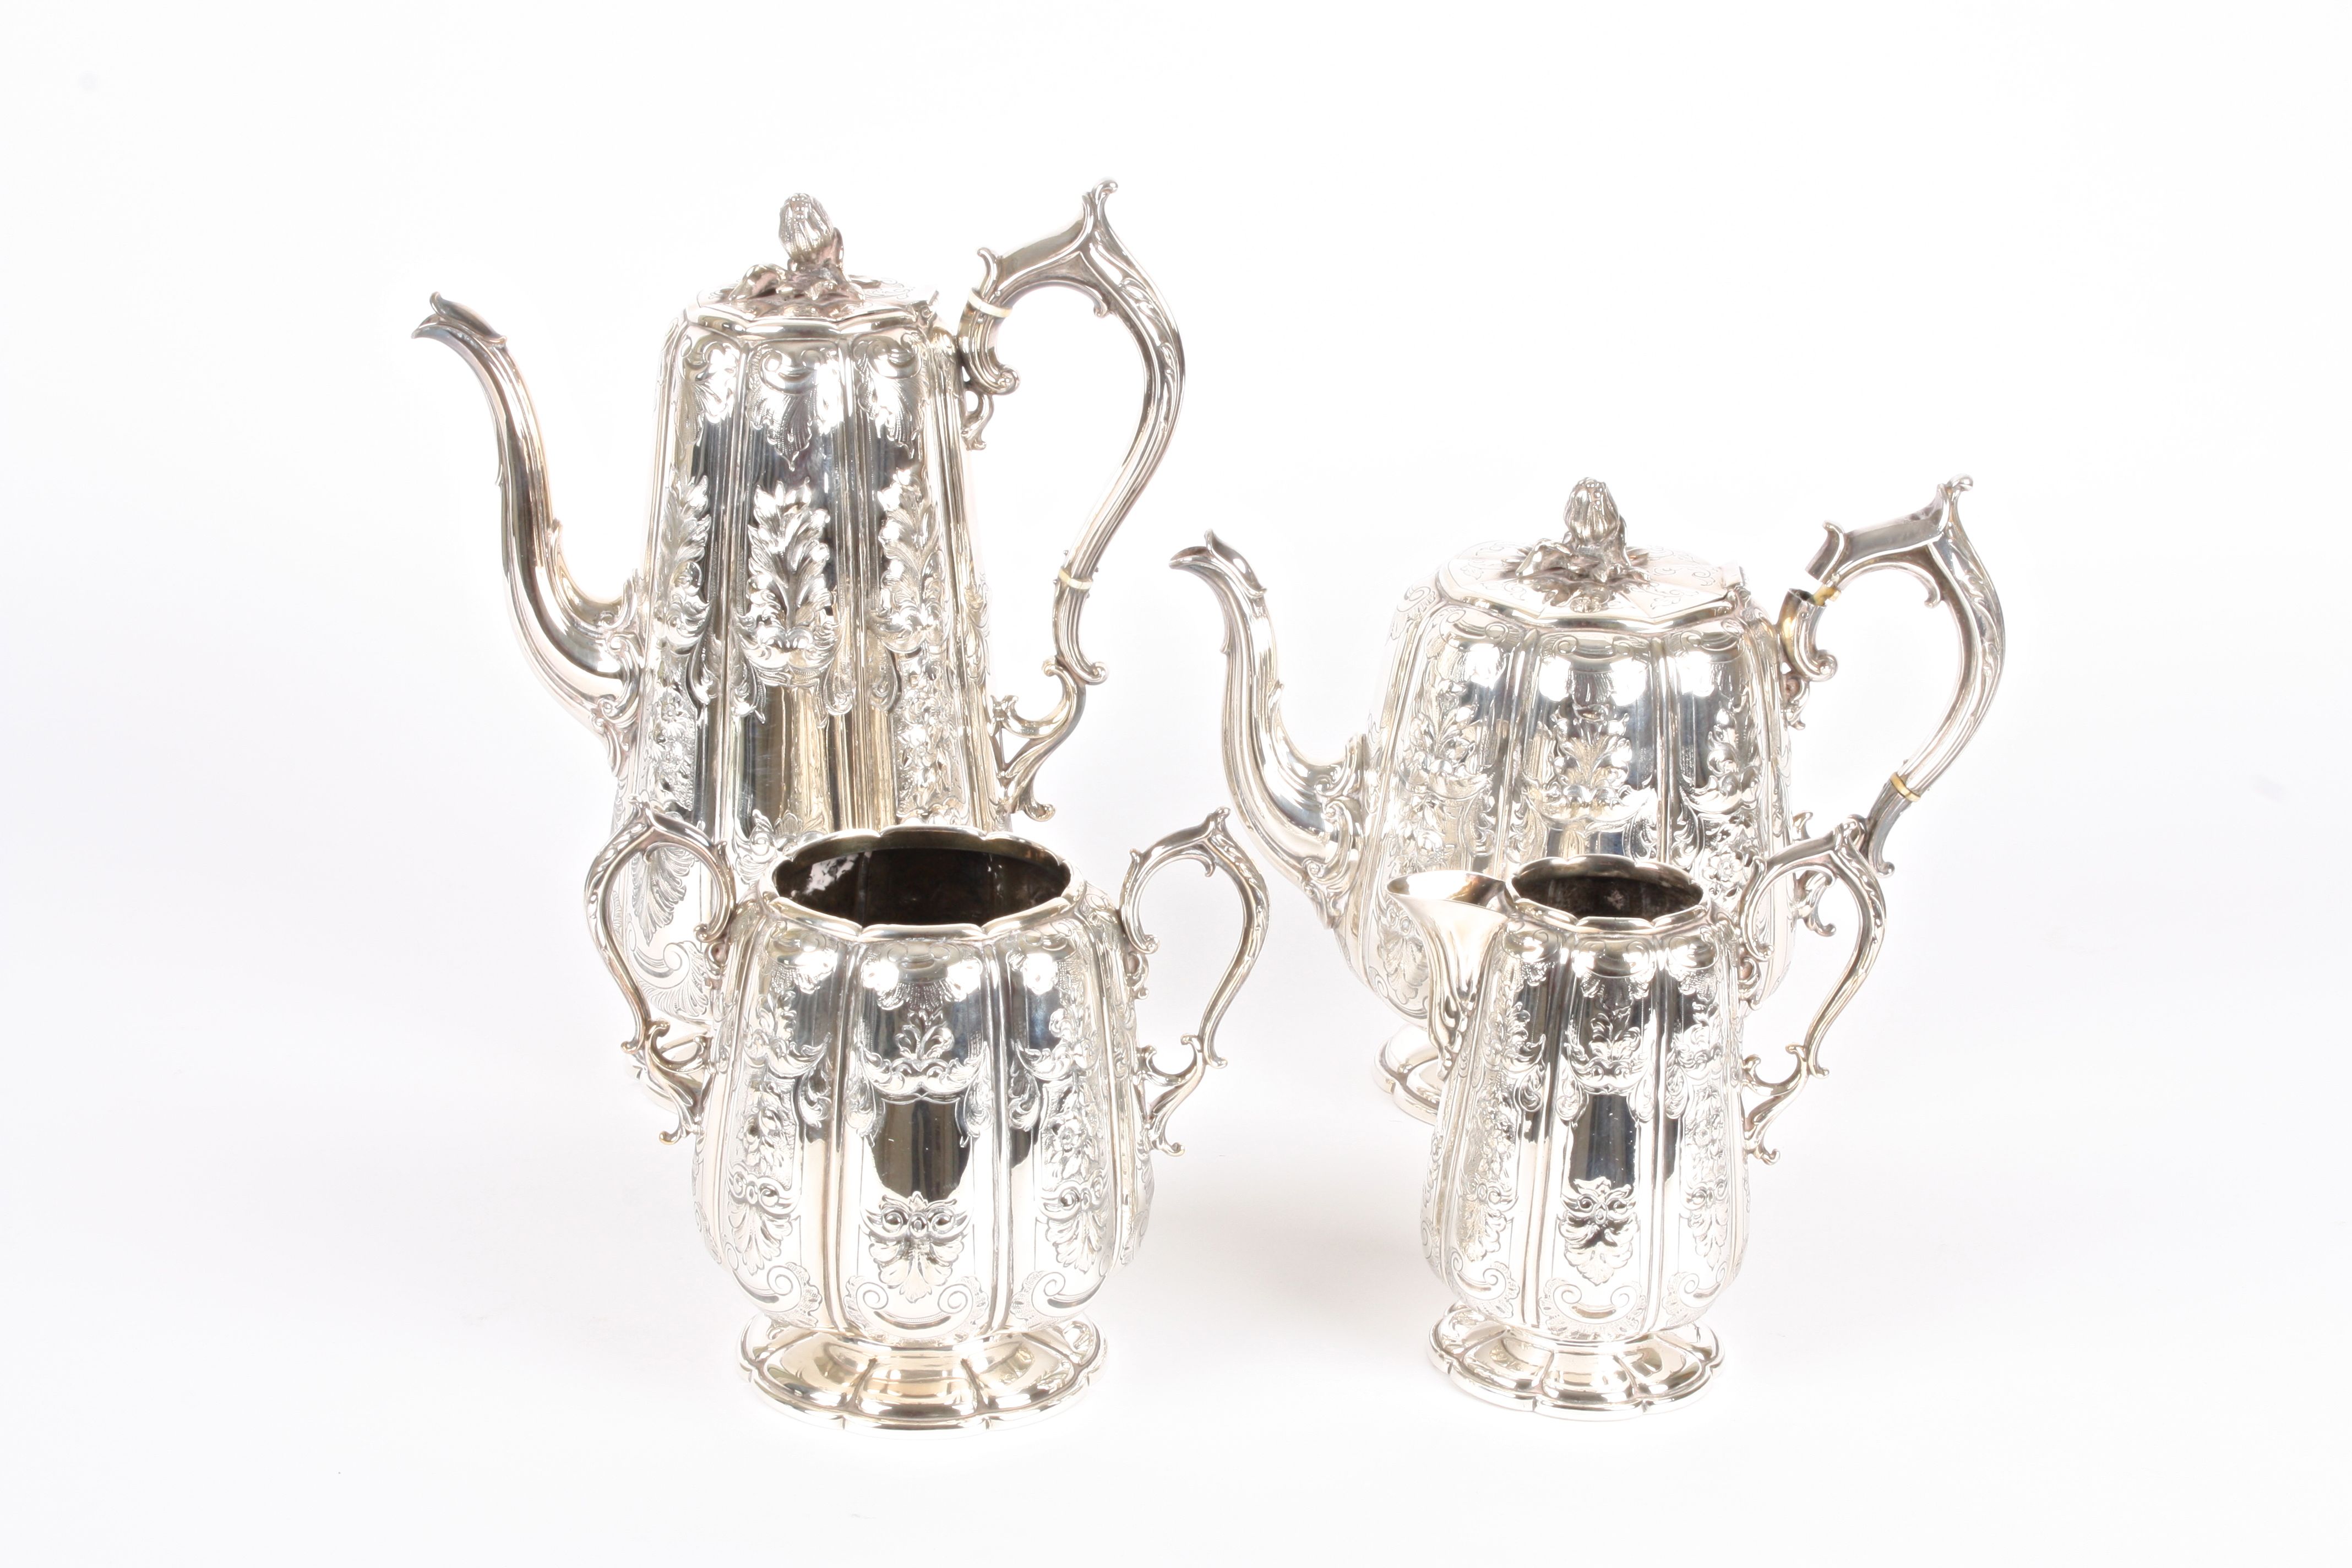 A silver plated Elkington and Co. four piece tea set with embossed acanthus leaf design height of